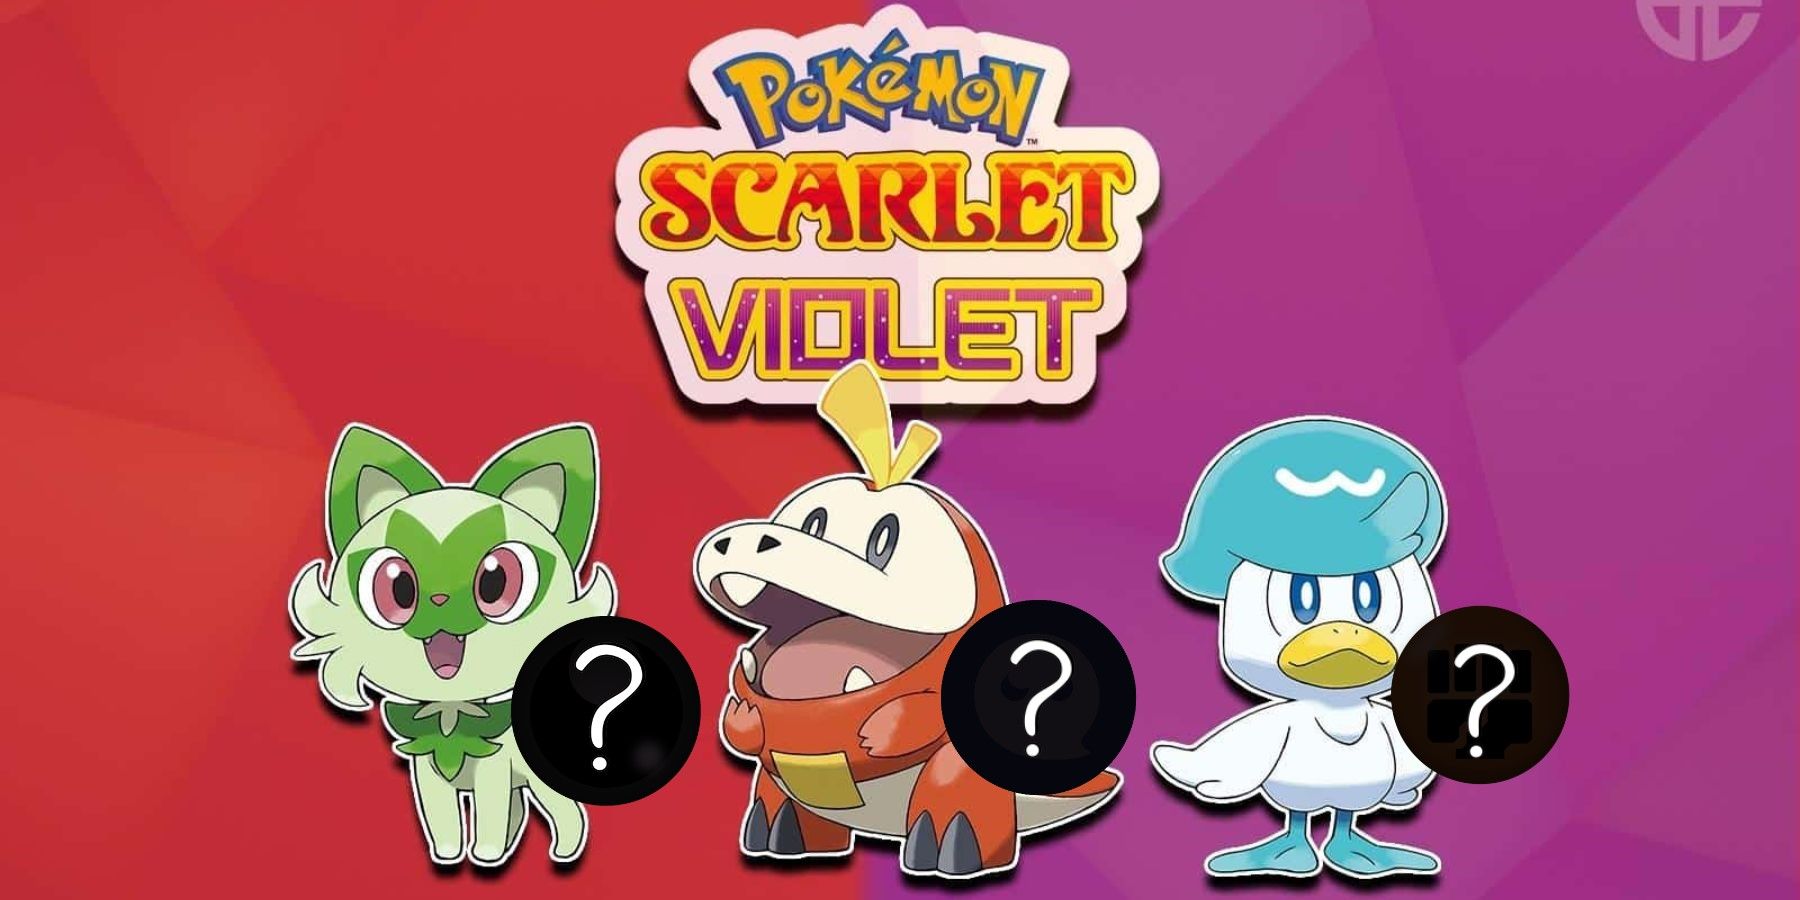 Pokémon Scarlet and Violet starter evolutions and what they look